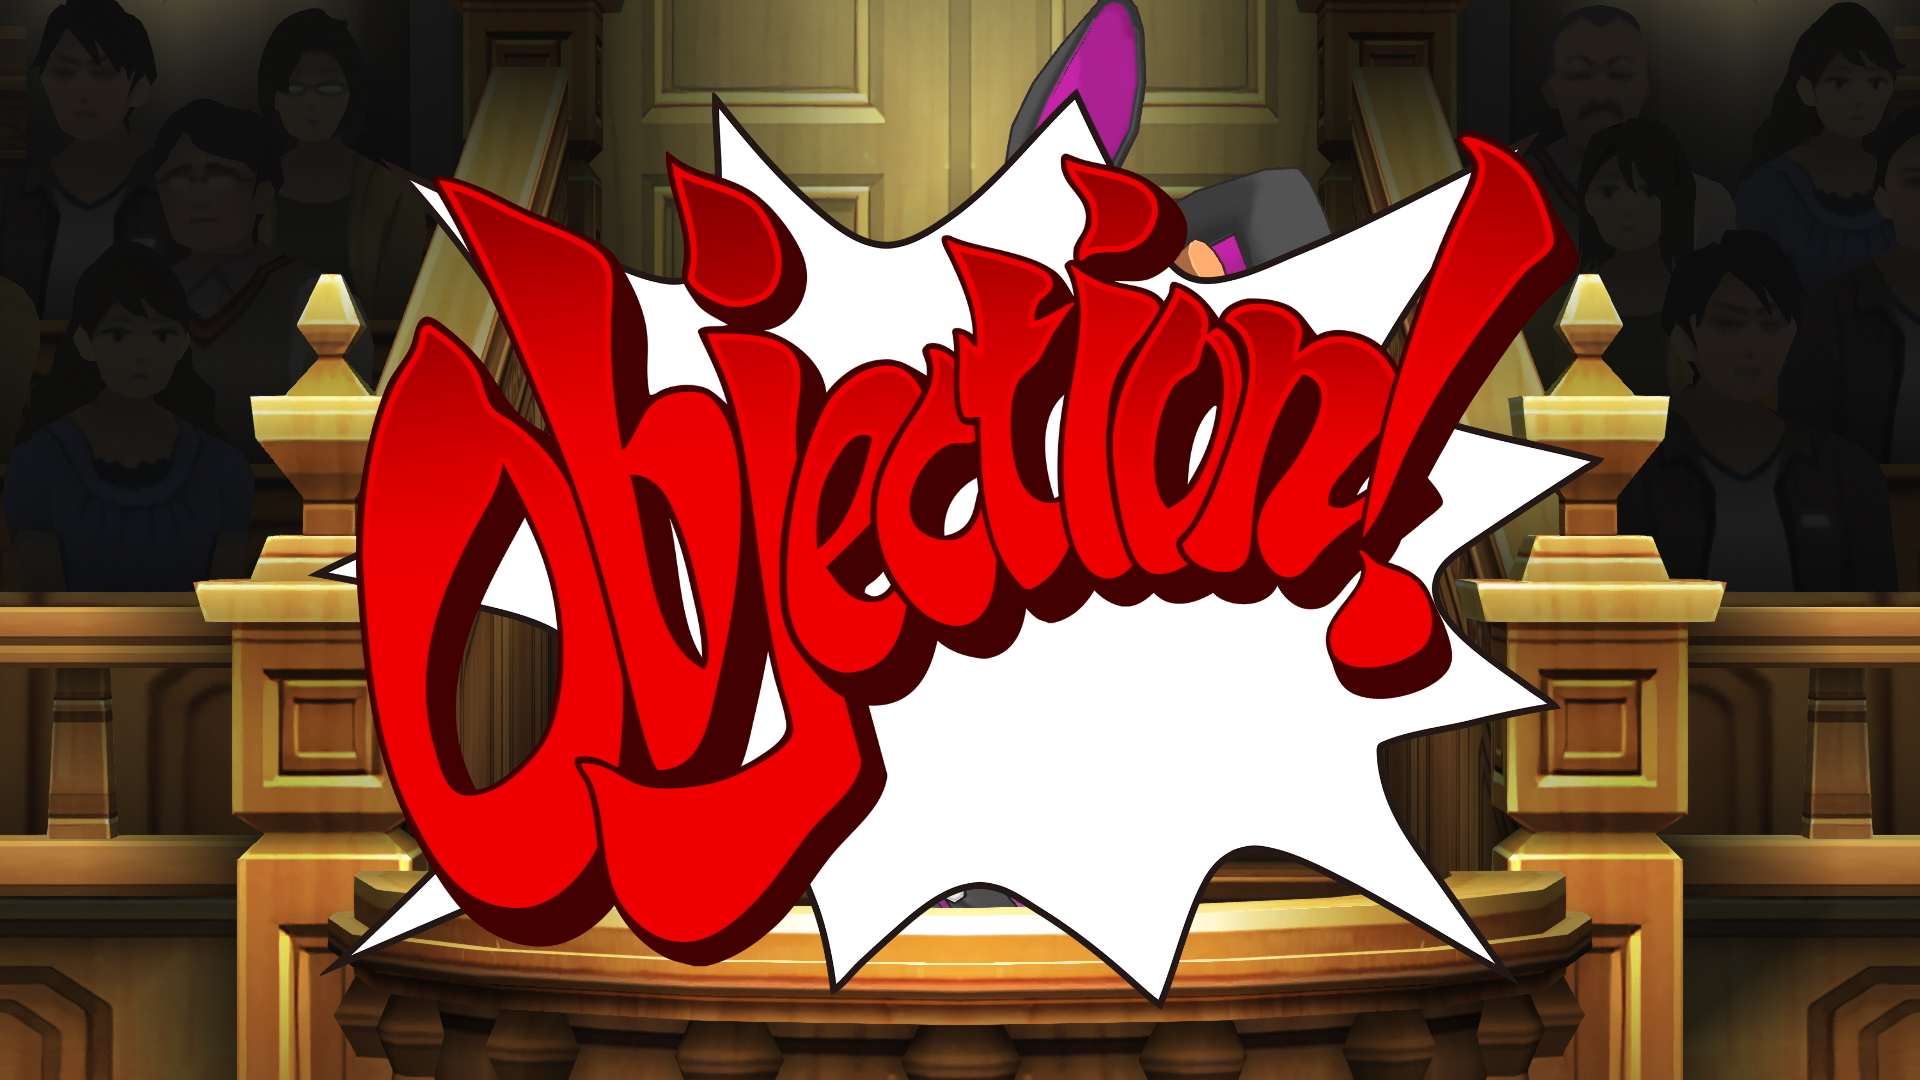 A screenshot from Apollo Justice: Ace Attorney Trilogy. It says "Objection!" in a comic style.